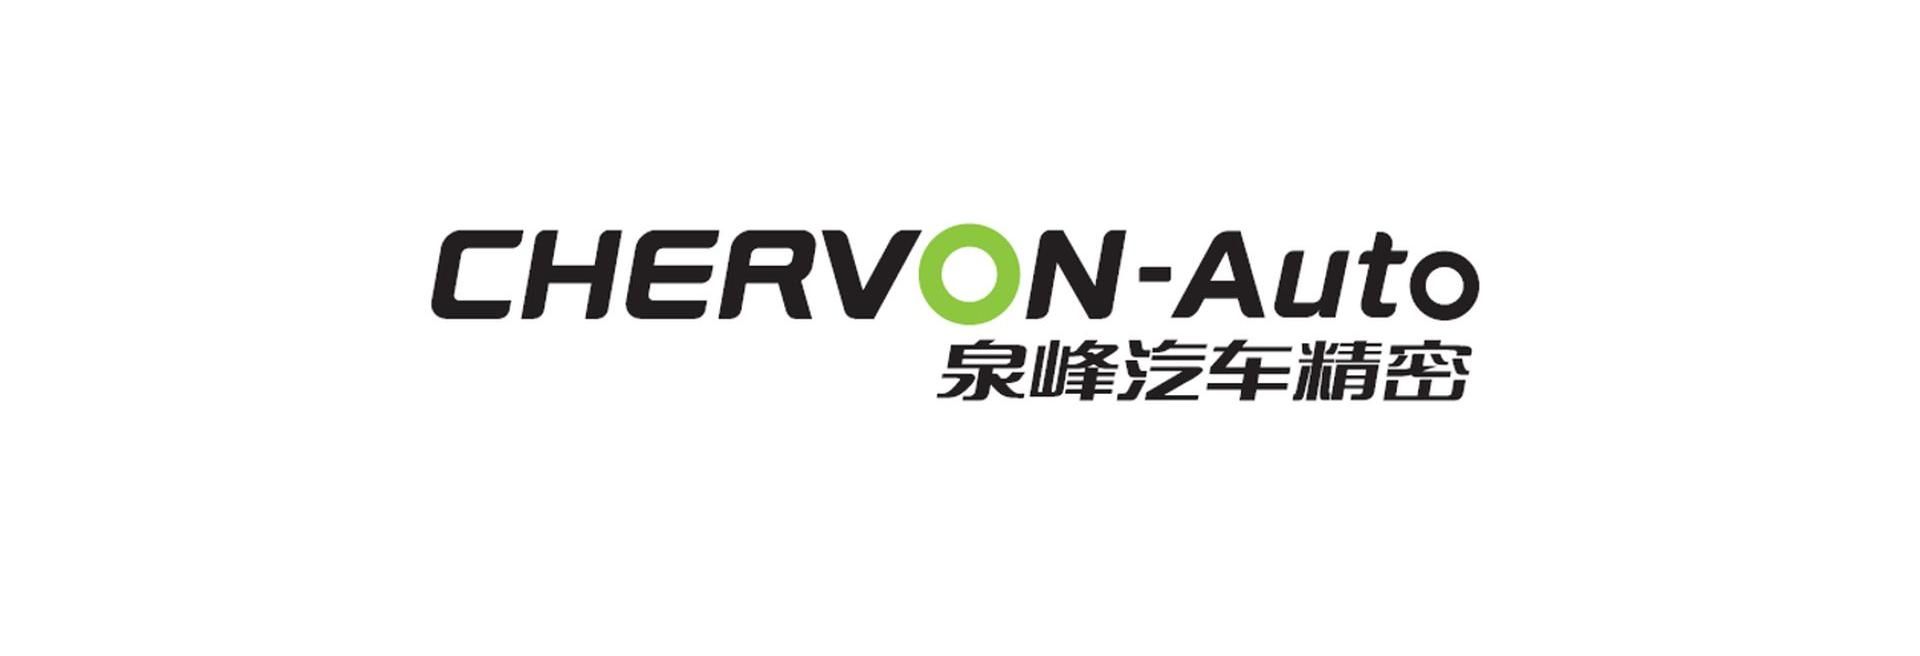 Domestic E-car Manufacturing Positions Strengthened Further By Chervon’s Latest Expansion